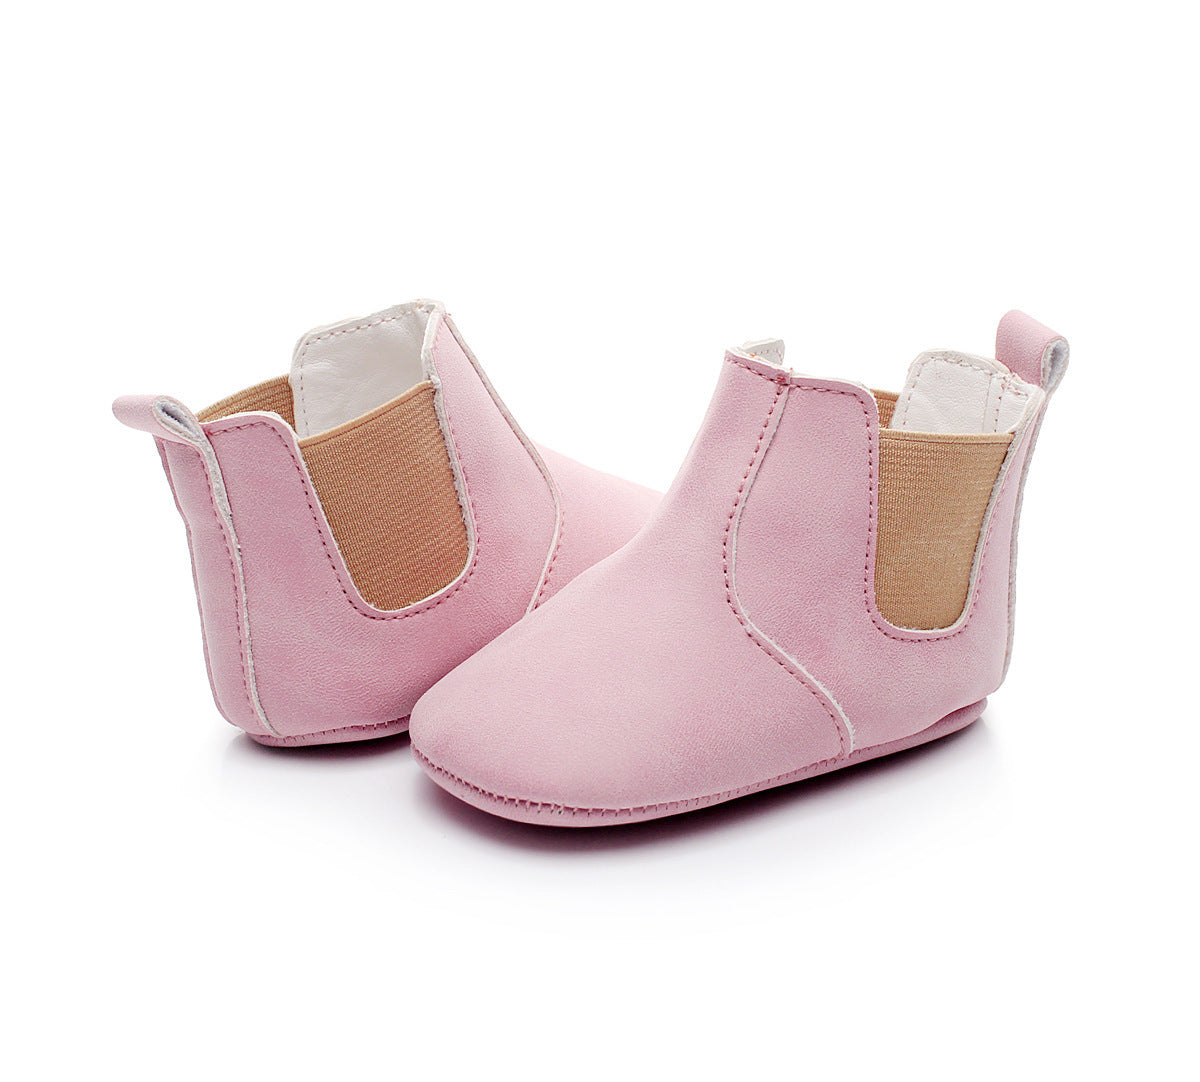 Baby Shoes Baby Xie Shoes Toddler Shoes Elastic PU Soft Shoes Children's Shoes